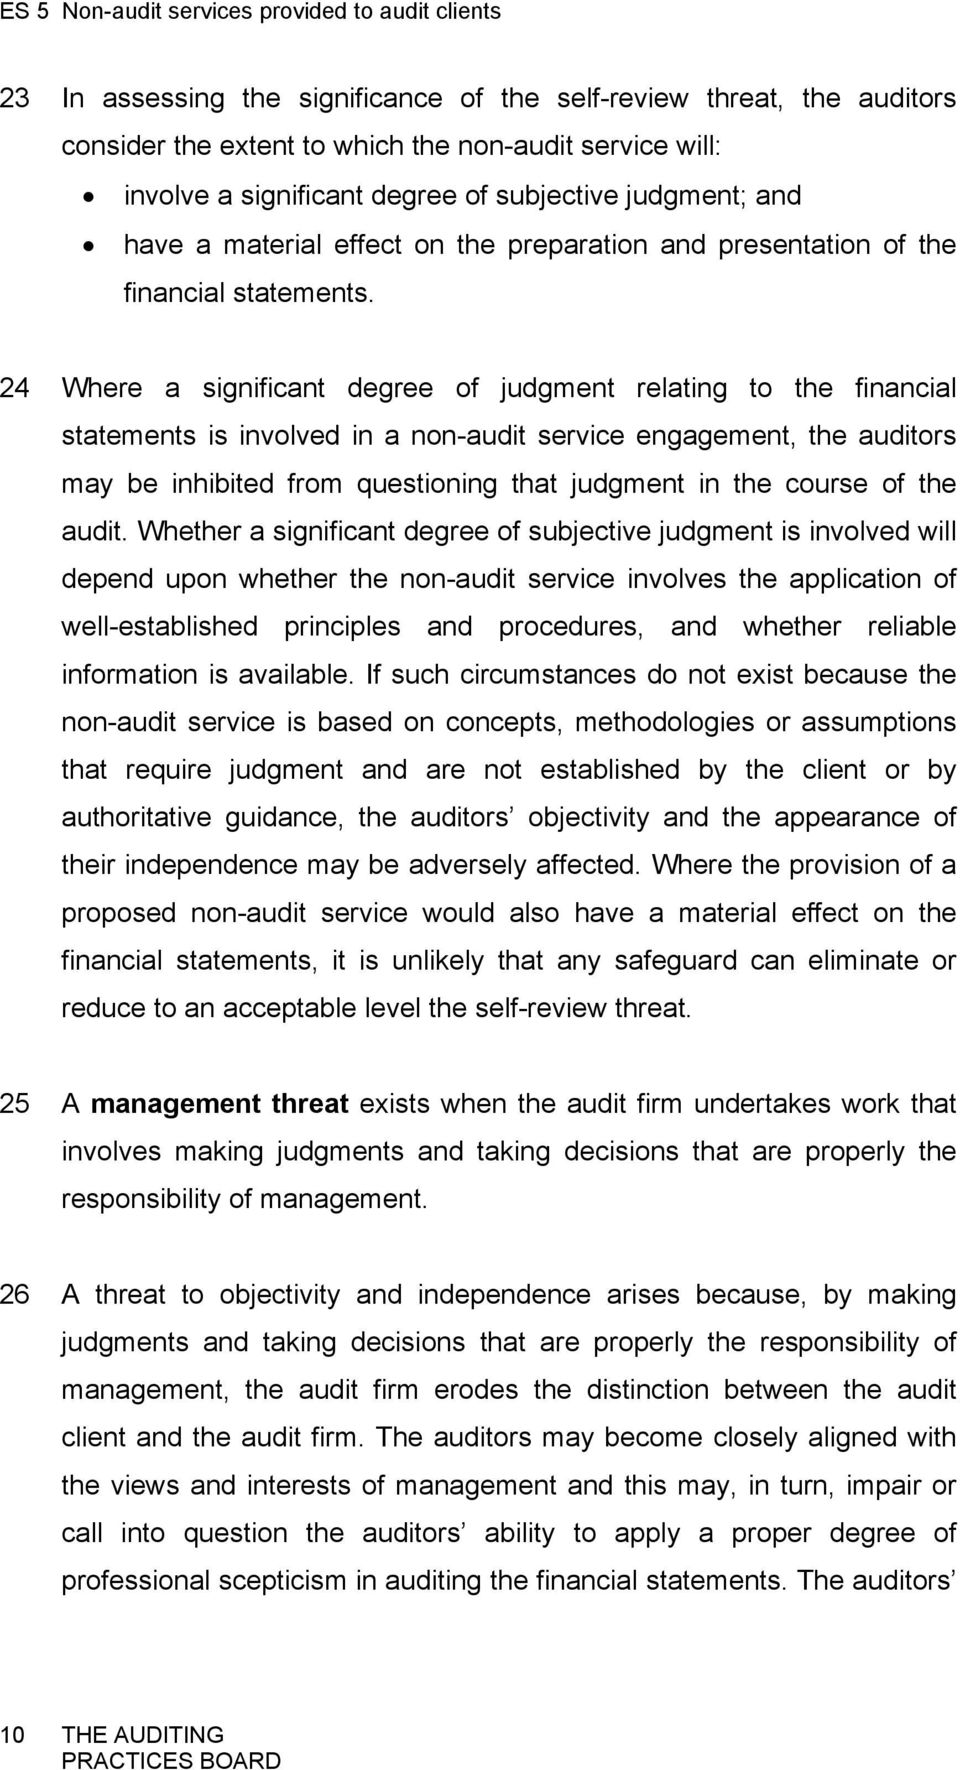 24 Where a significant degree of judgment relating to the financial statements is involved in a non-audit service engagement, the auditors may be inhibited from questioning that judgment in the